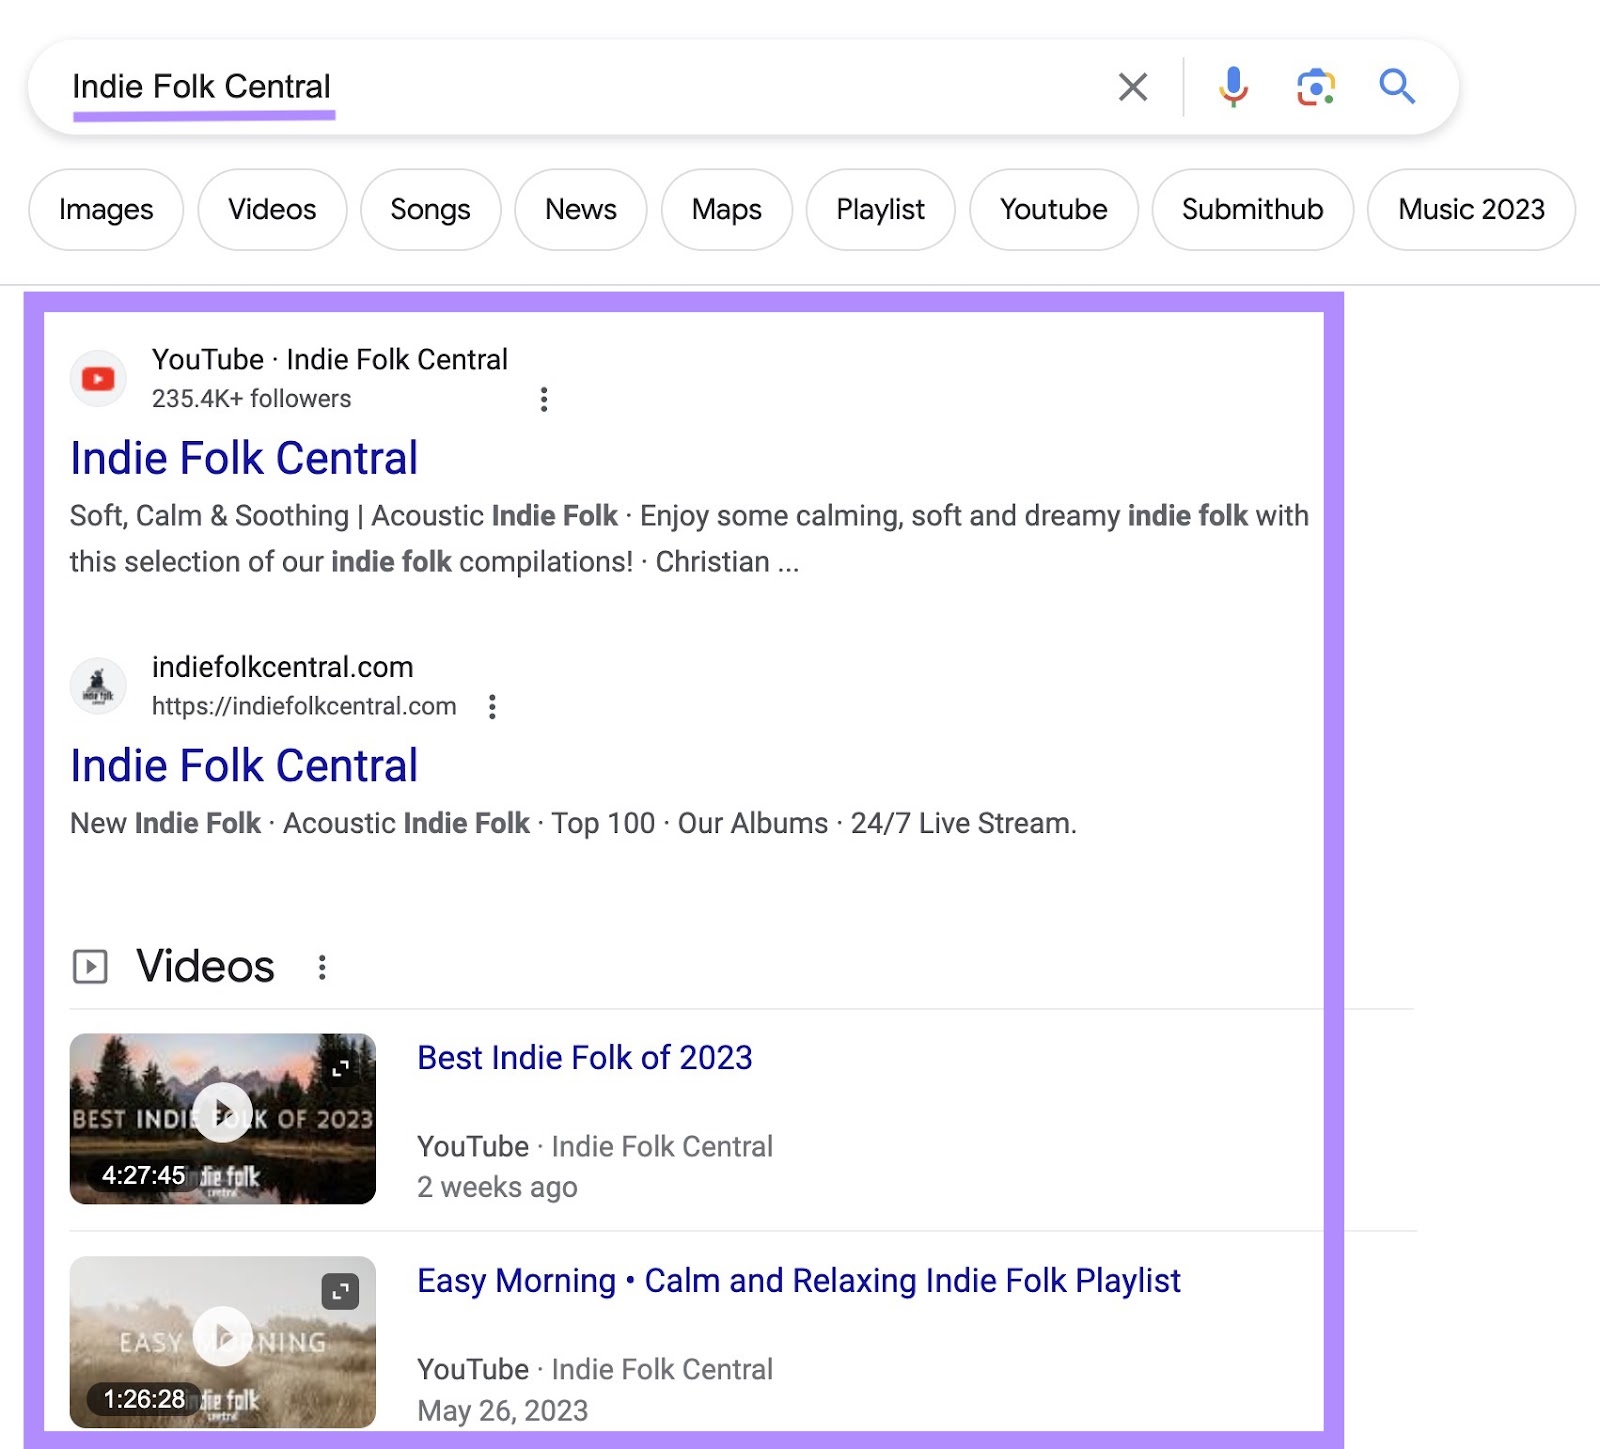 Google's SERP for "Indie Folk Central" showing a YouTube channel and website results